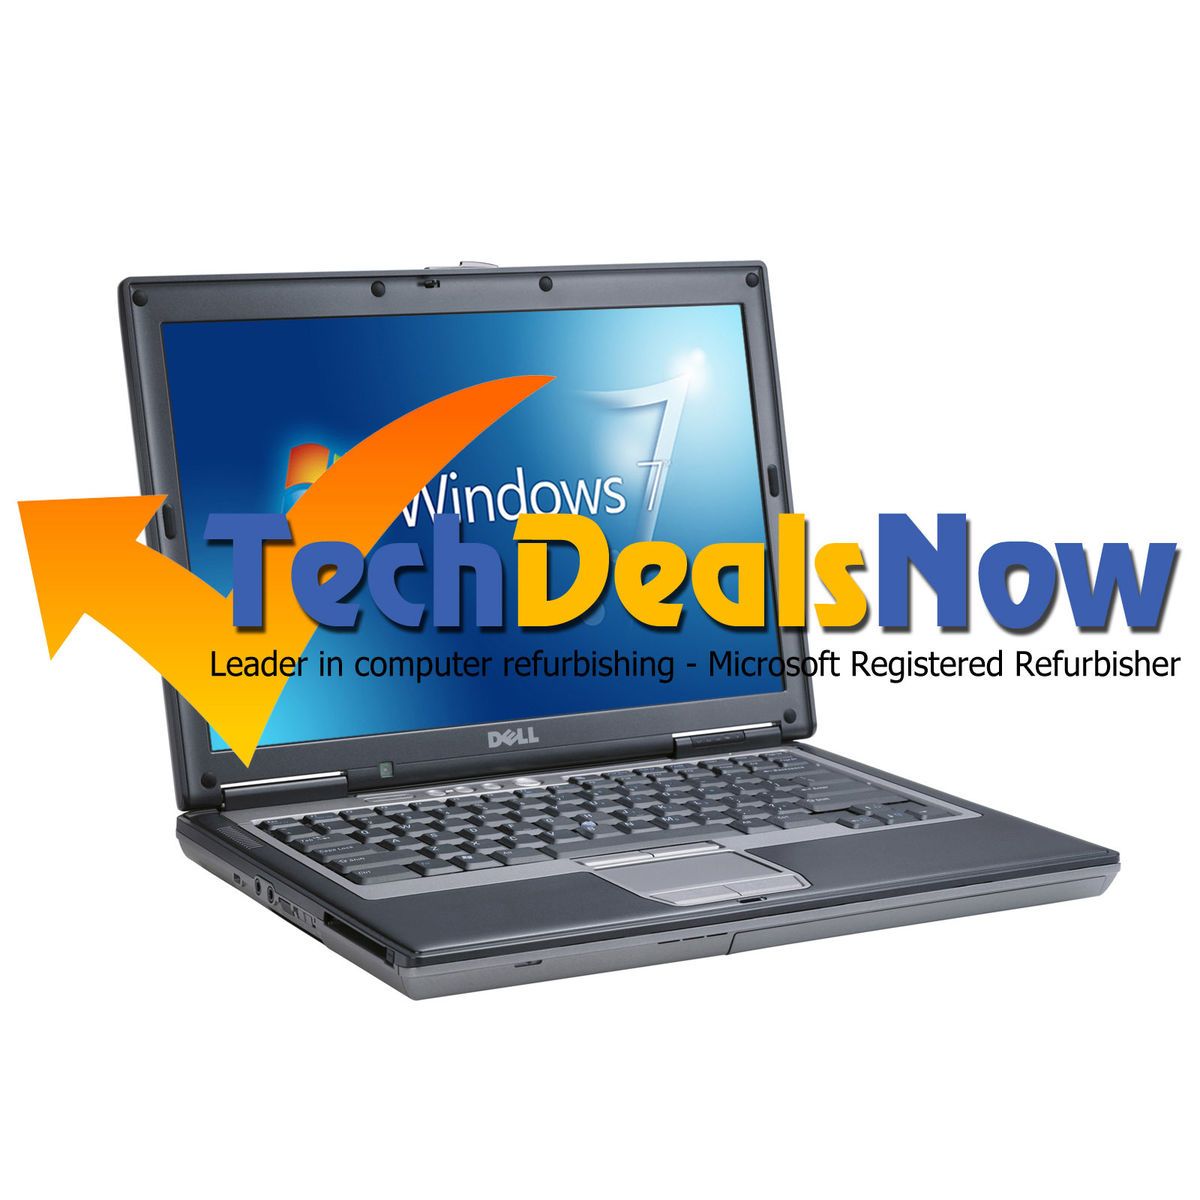 REFURBISHED DELL D630 LAPTOP NOTEBOOK CORE 2 DUO 2 20 GHZ 2GB RAM 80GB